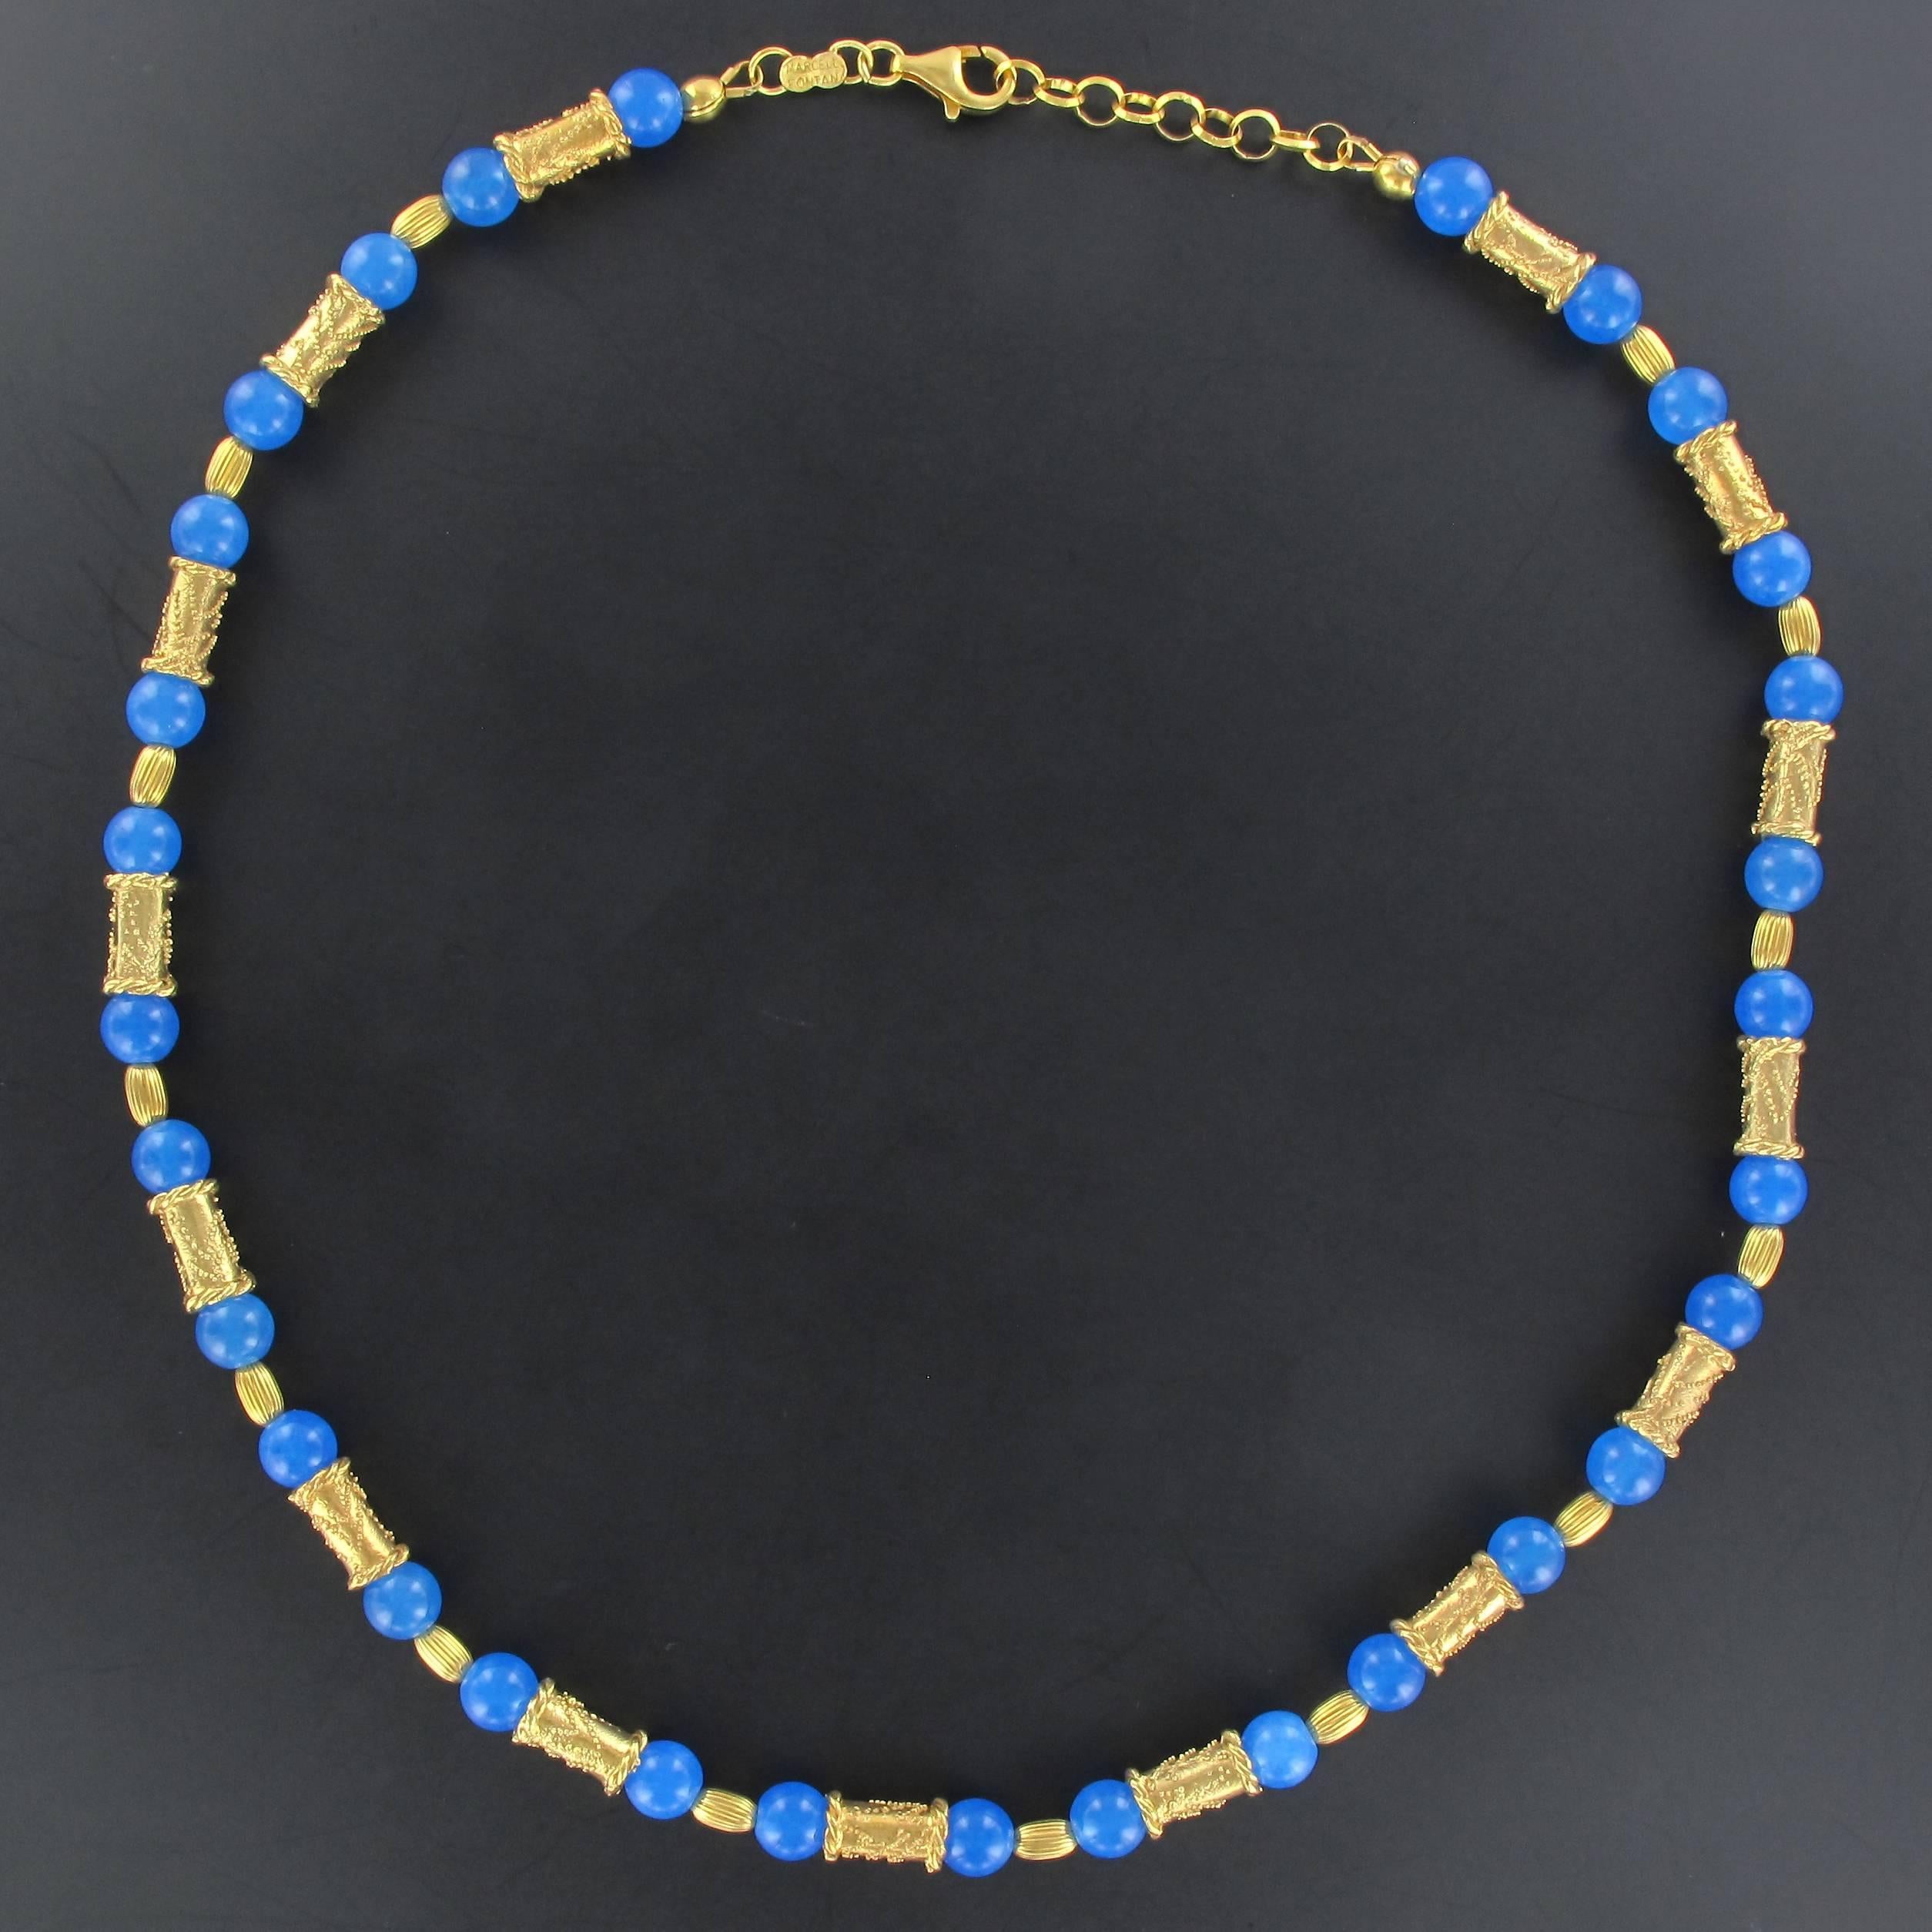 Etruscan Revival Marcello Fontana Etruscan Style Vermeil Silver Yellow Gold Necklace